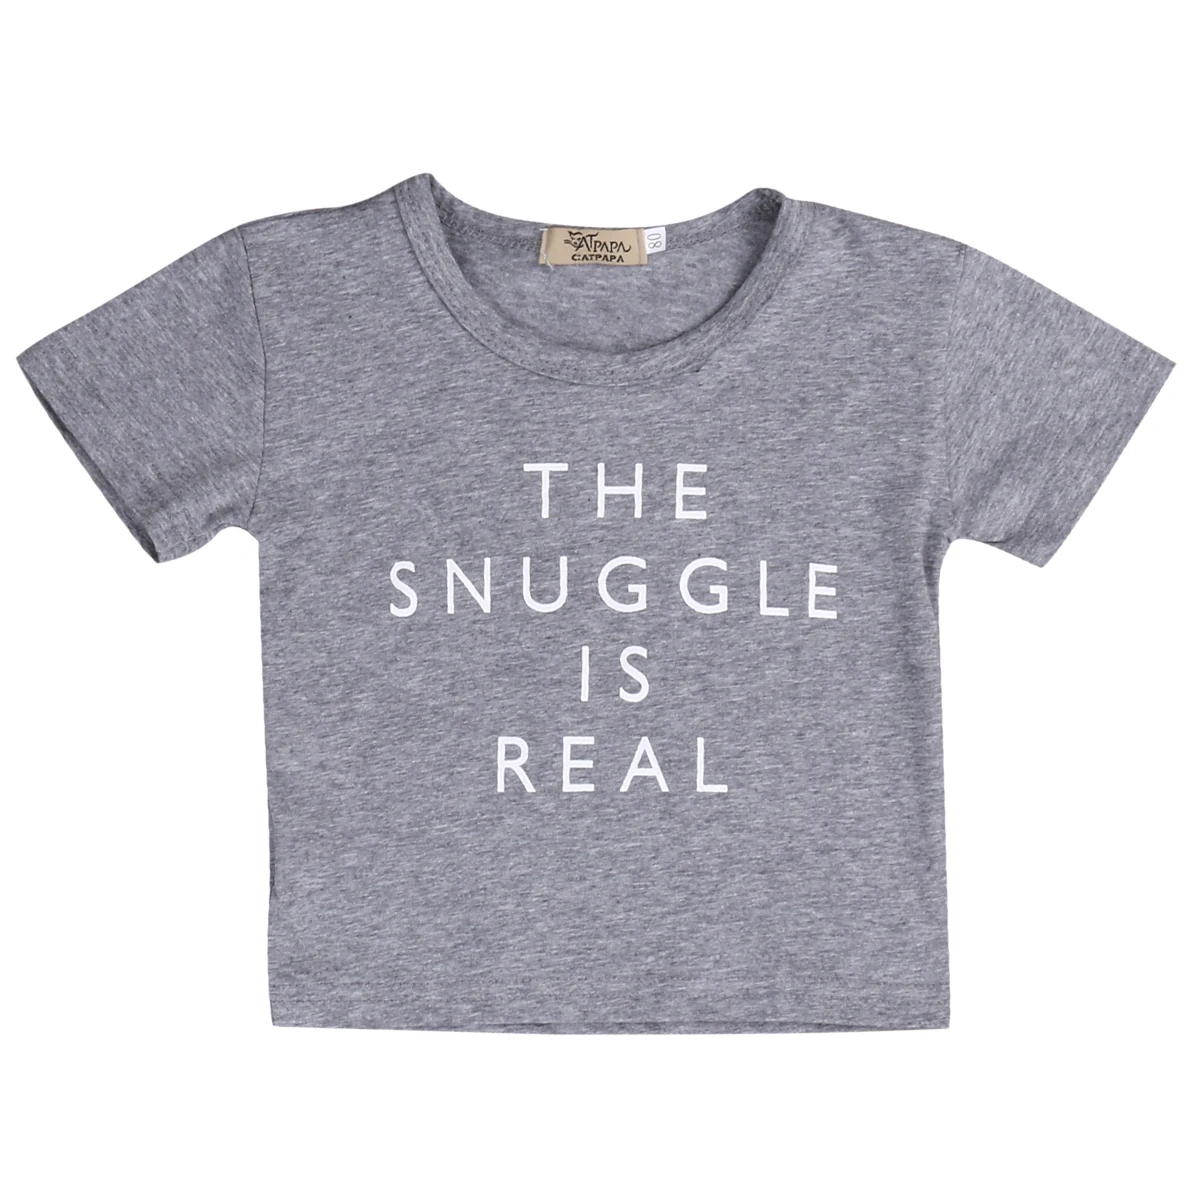 Emmababy High Quality Newborn Kids Summer Clothes Baby Boy Girl Cotton Short SleeveT Shirts Outfit Tops Tee - Color: Gray